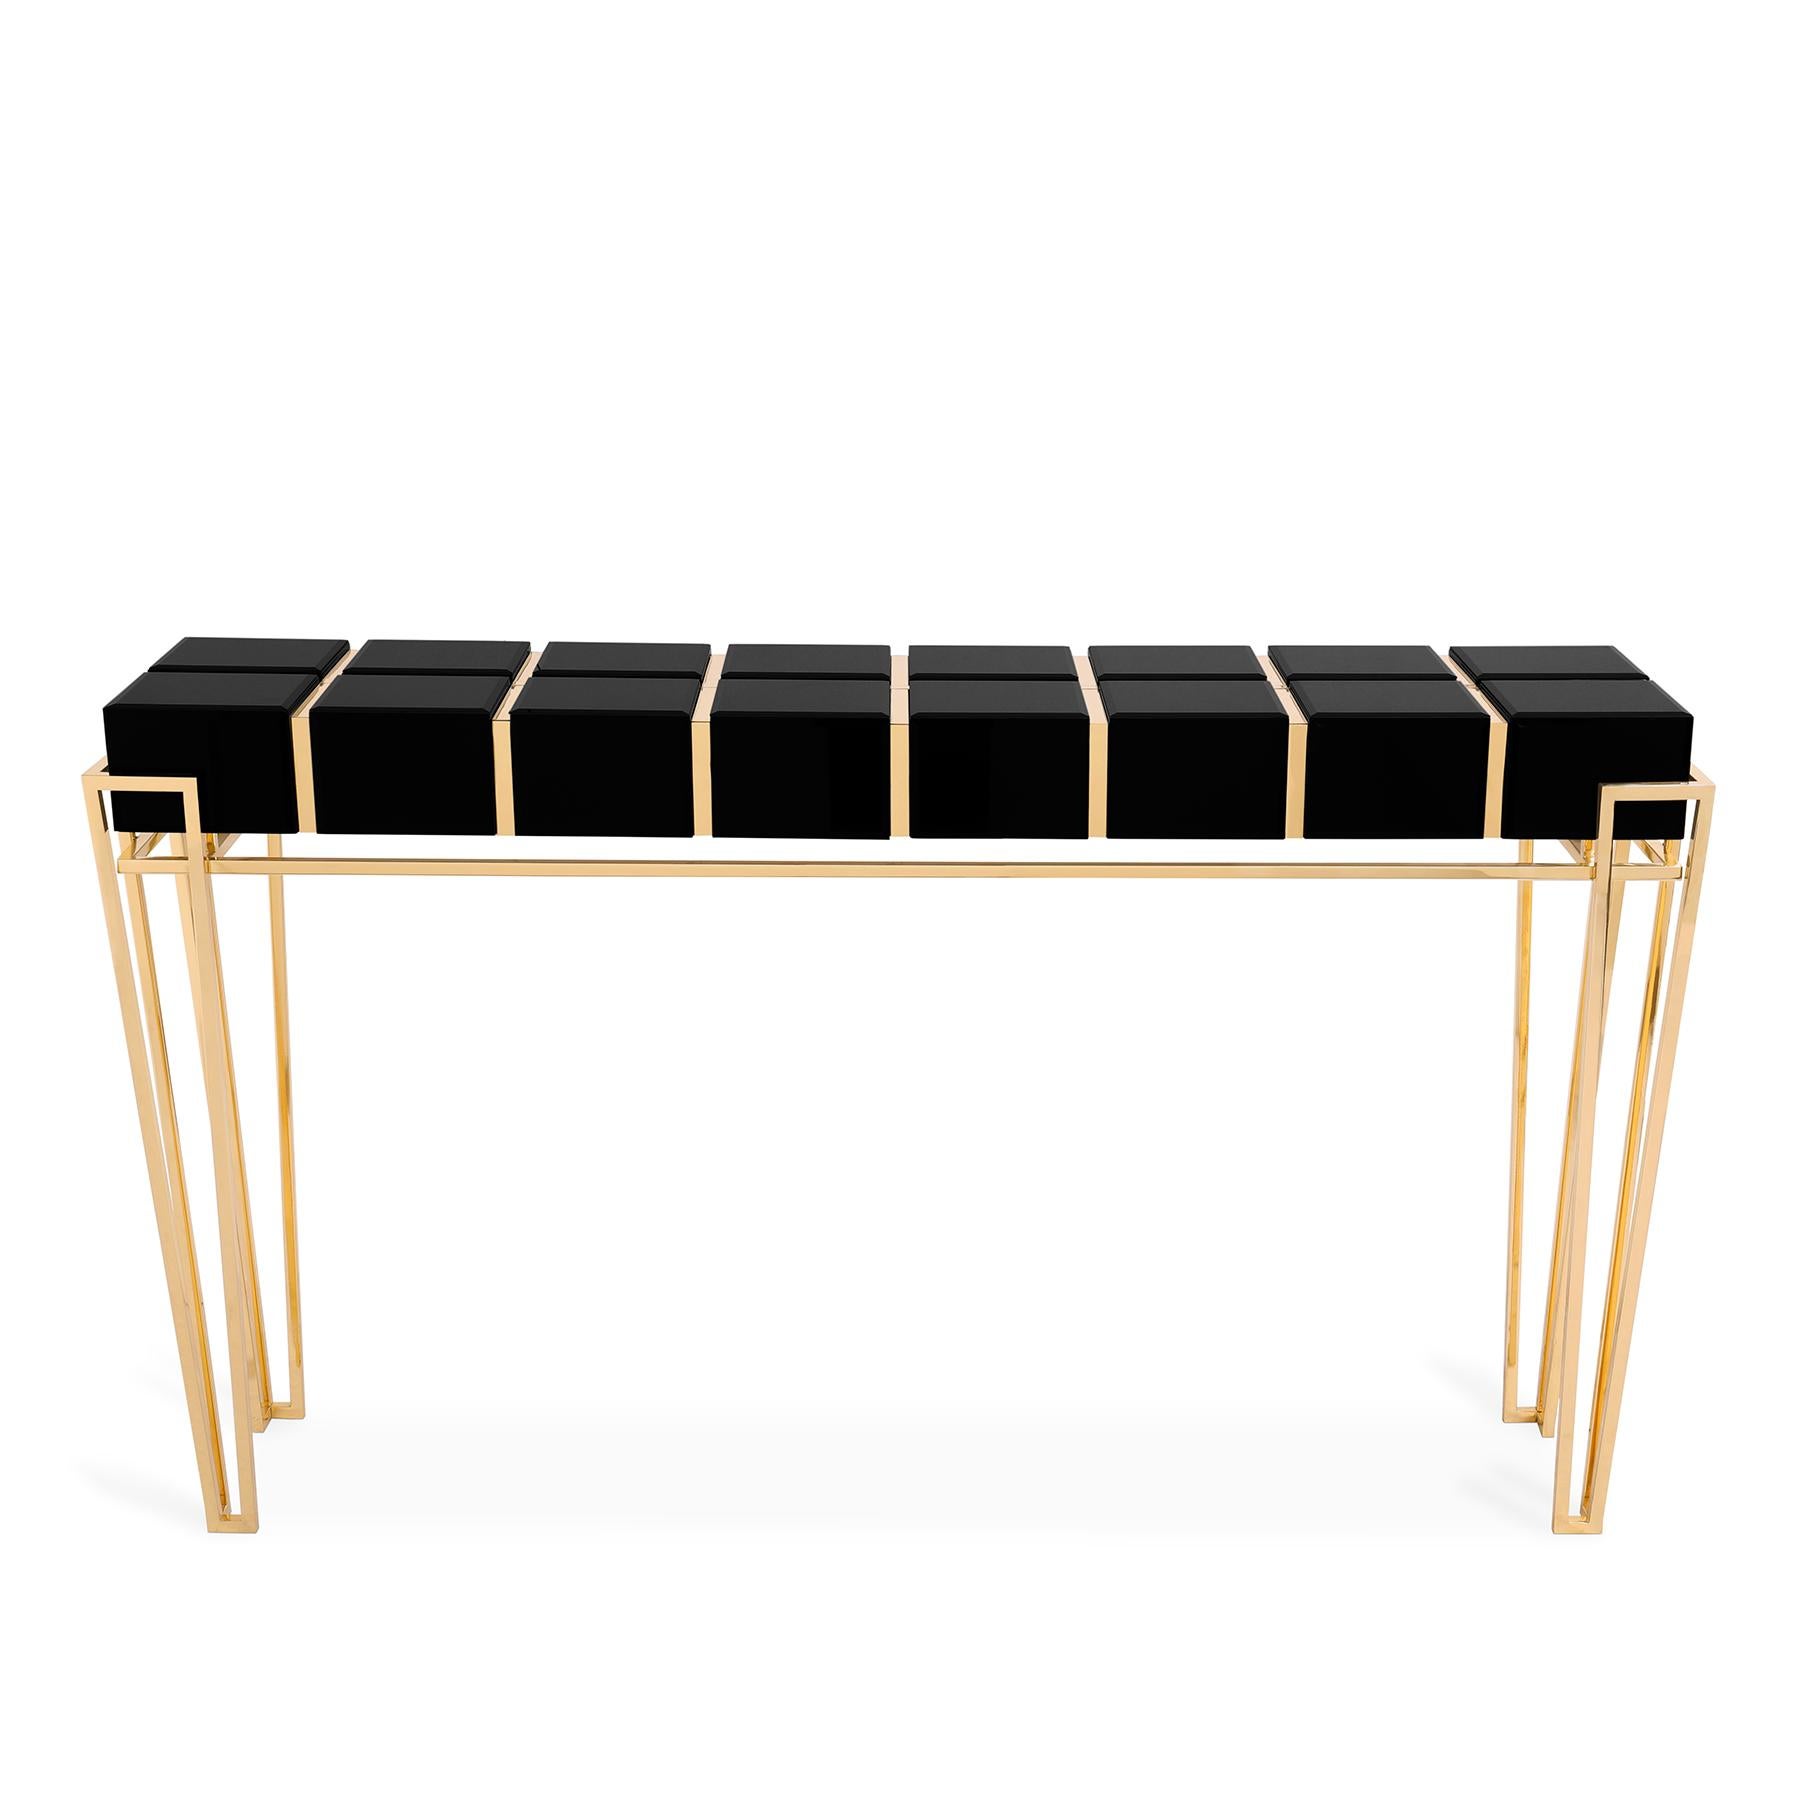 Console Williams with solid brass structure in polished
brass, with wooden body covered with blackened glass top.